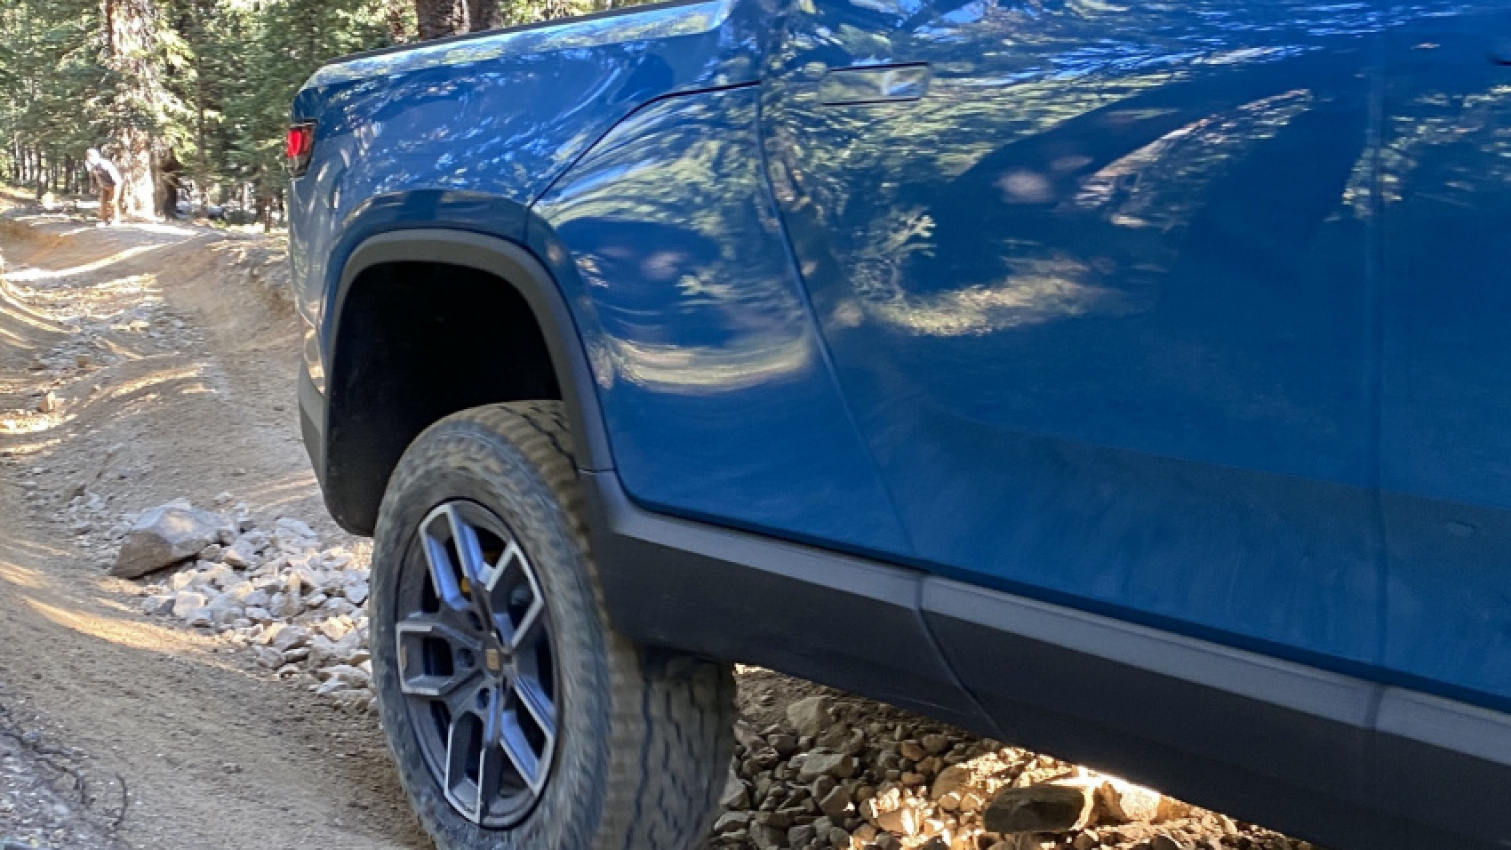 autos, cars, rivian, electric cars, first drives, rivian news, rivian r1t news, first drive review: 2022 rivian r1t shines as the north star of utility vehicles